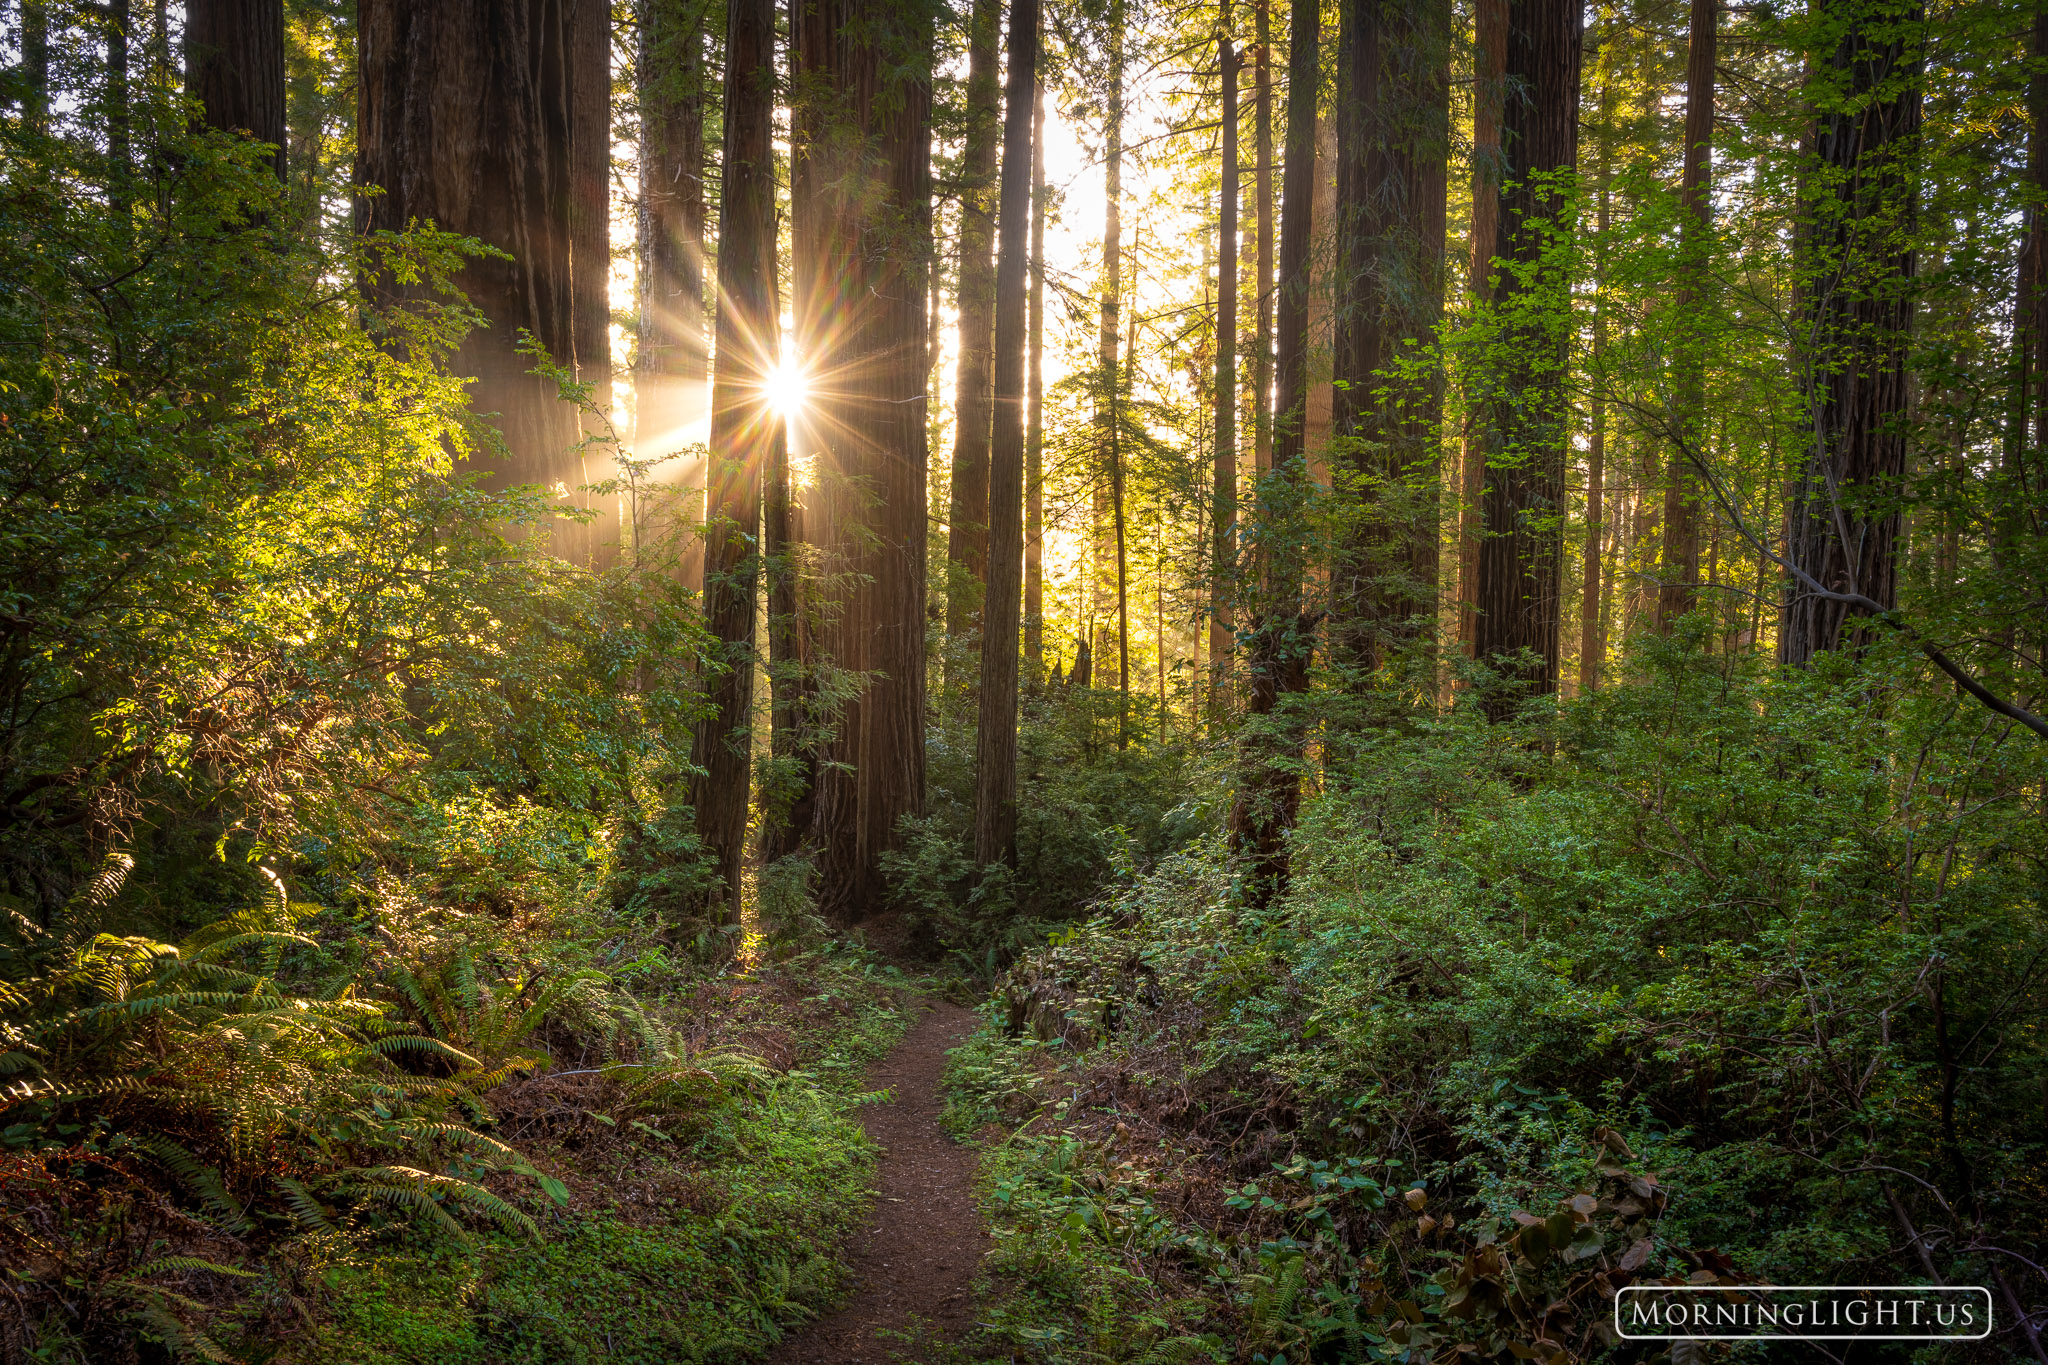 The light breaks through the trees on the ZigZag Trail in Redwood State and National Park, California.